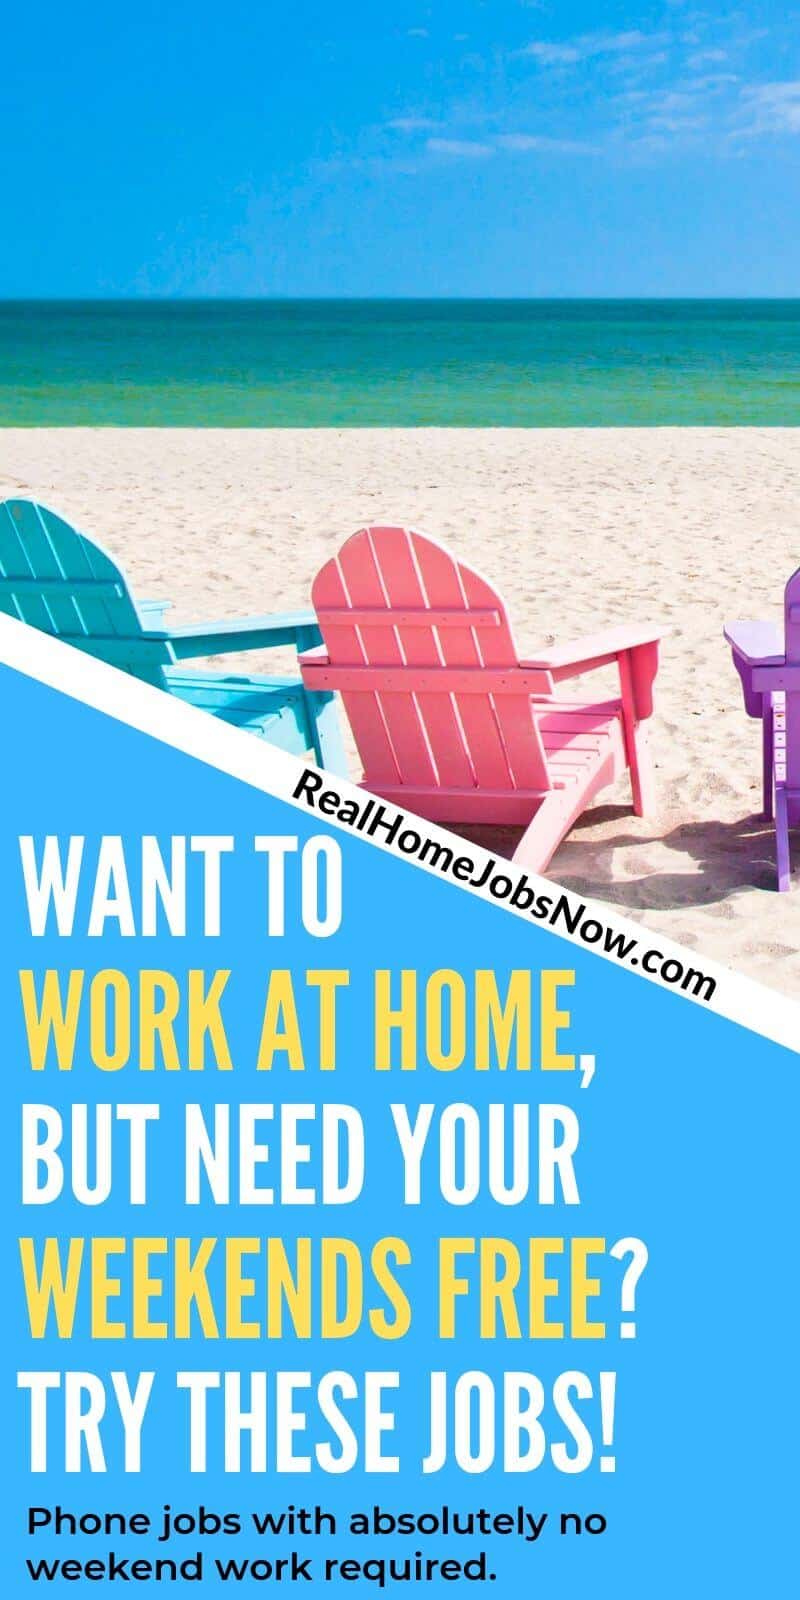 Have your weekends to yourself with these work from home jobs that don't require working weekends. This list includes phone-based jobs that let you schedule Mon-Fri, pay minimum $10 per hour, and some with benefits packages!